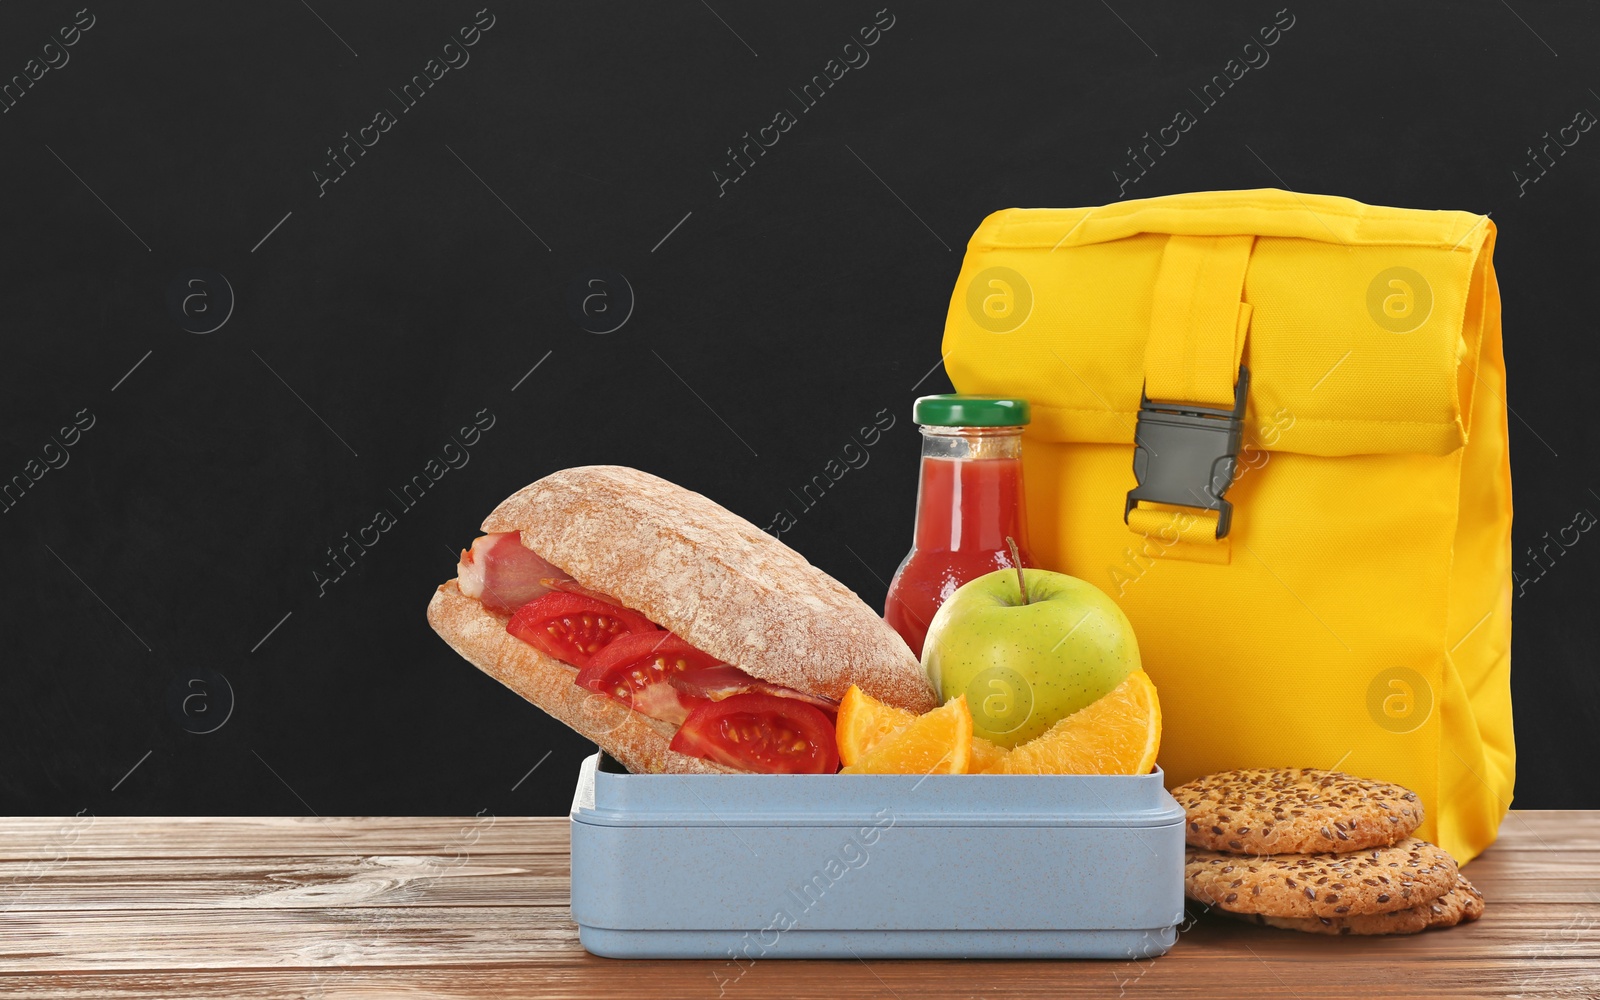 Image of Lunch box with appetizing food and bag on wooden table near blackboard